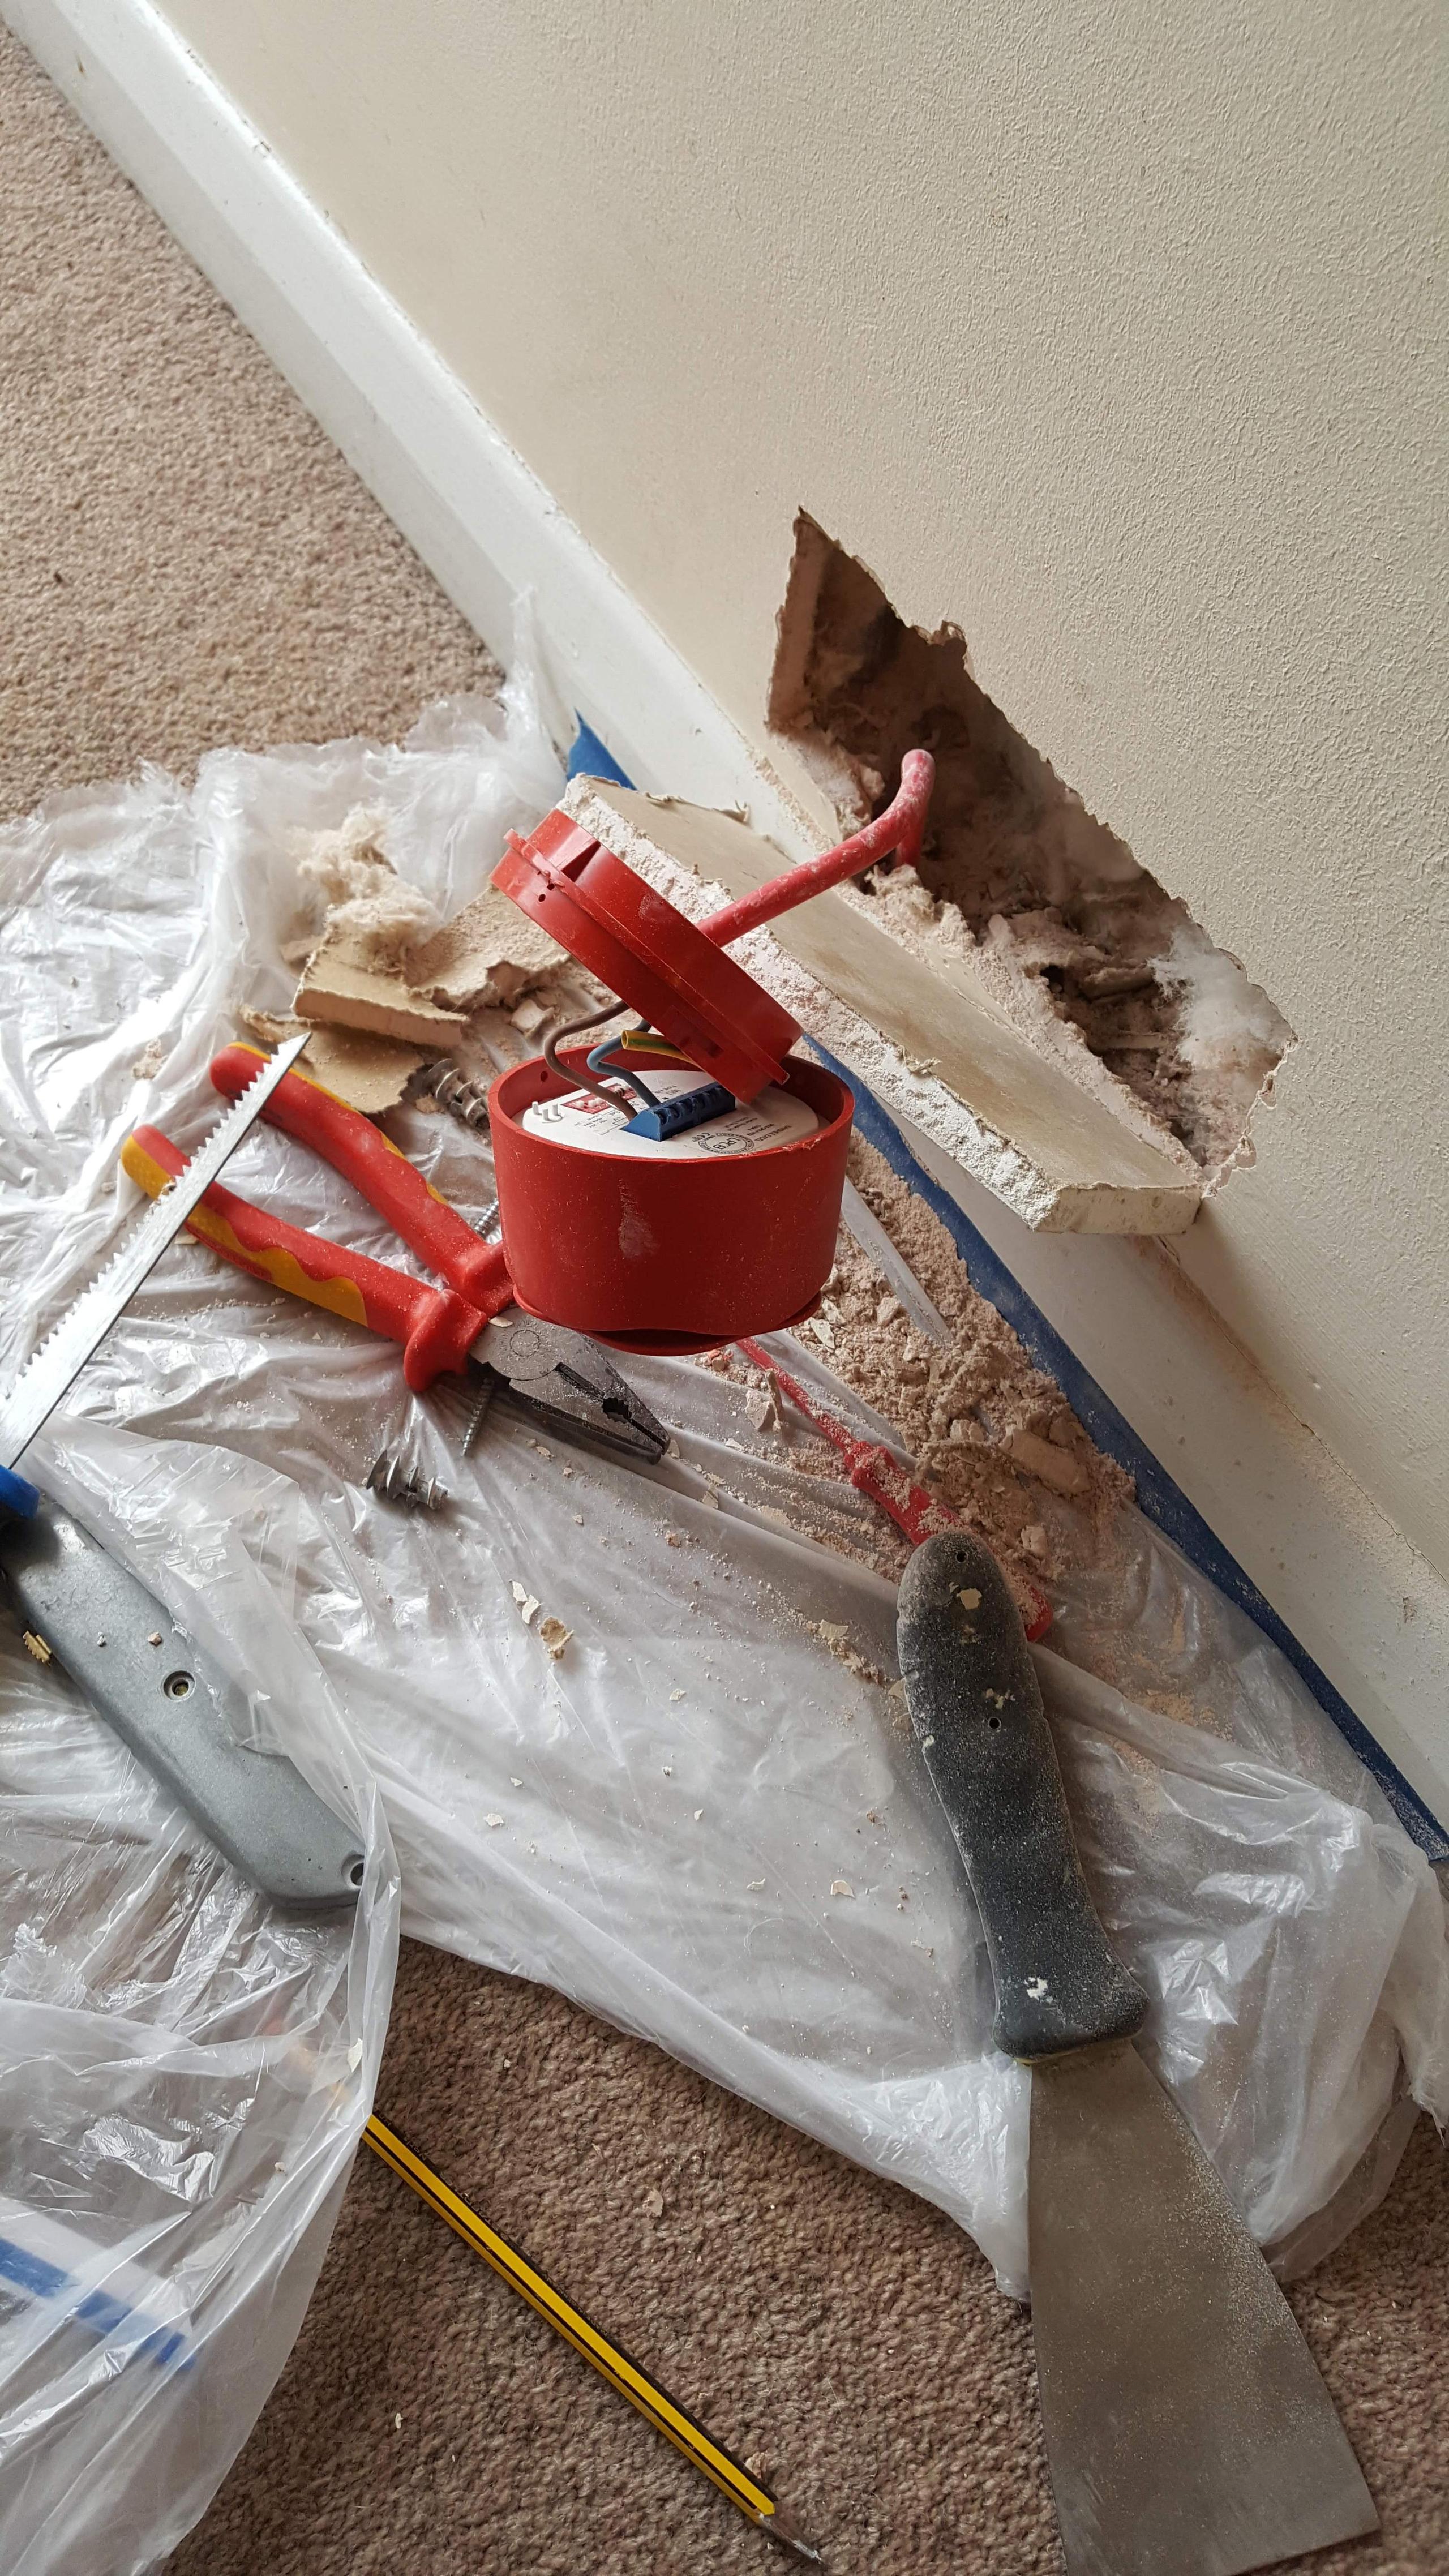 Replacing the damaged plasterboard